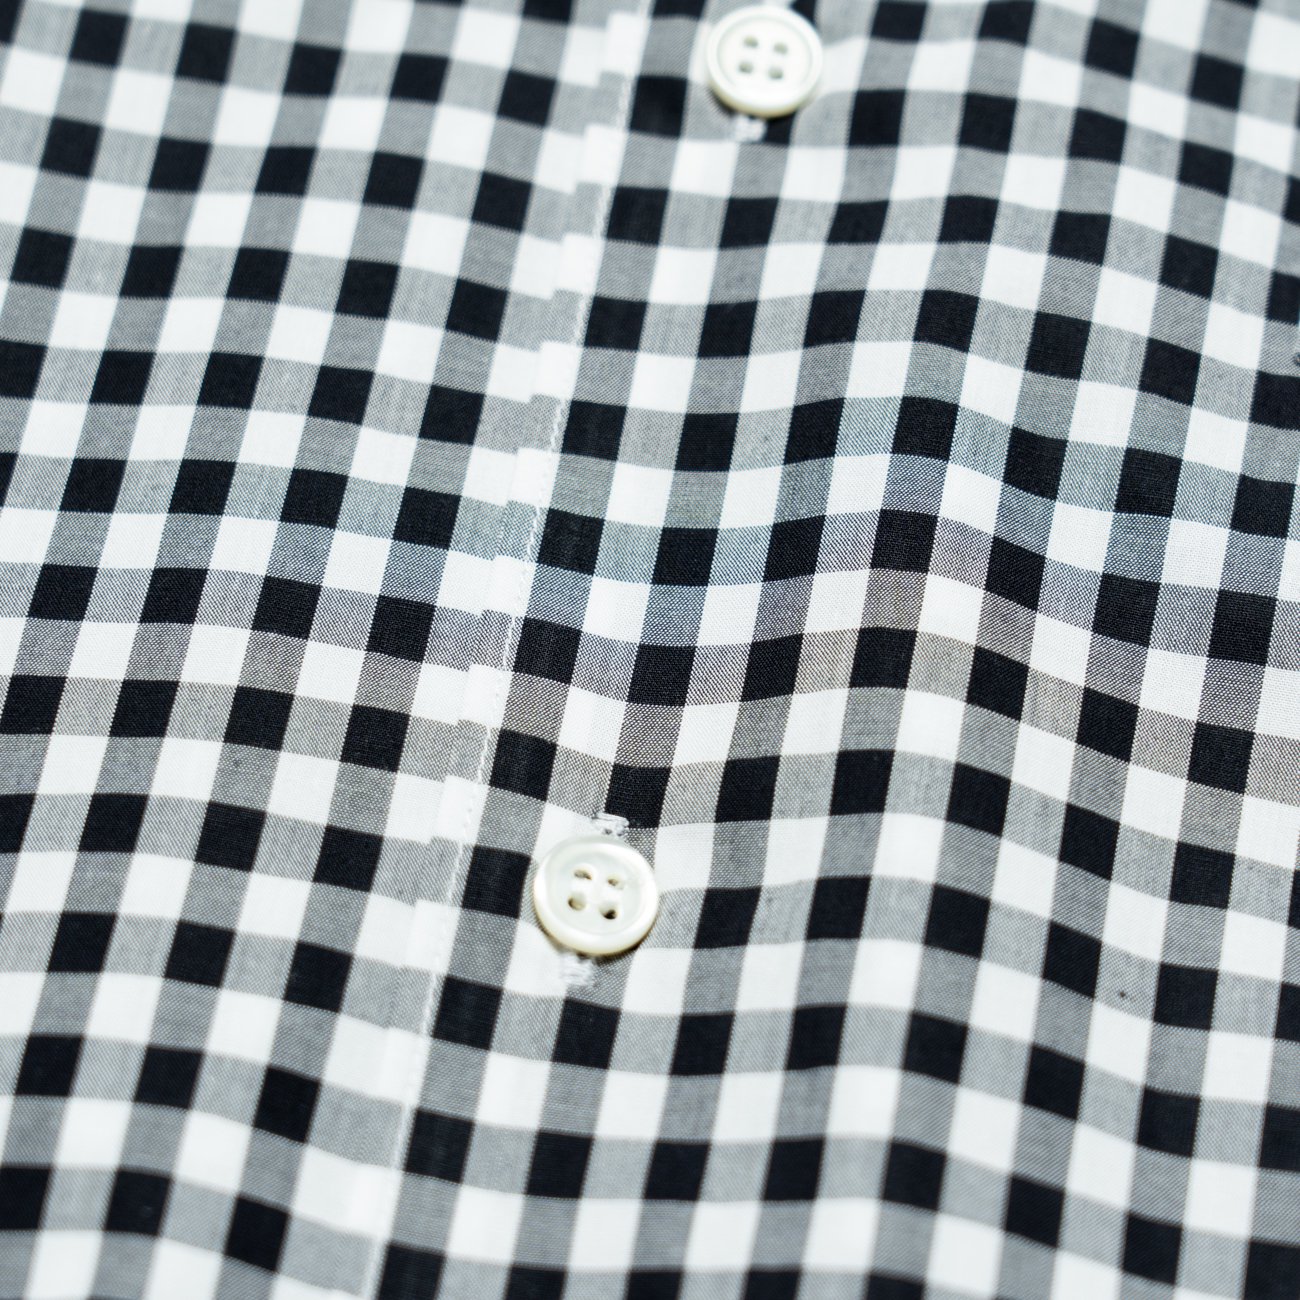 COMME des GARCONS SHIRT * Forever Wide Classic Gingham Check Long Sleeve Shirt * Black